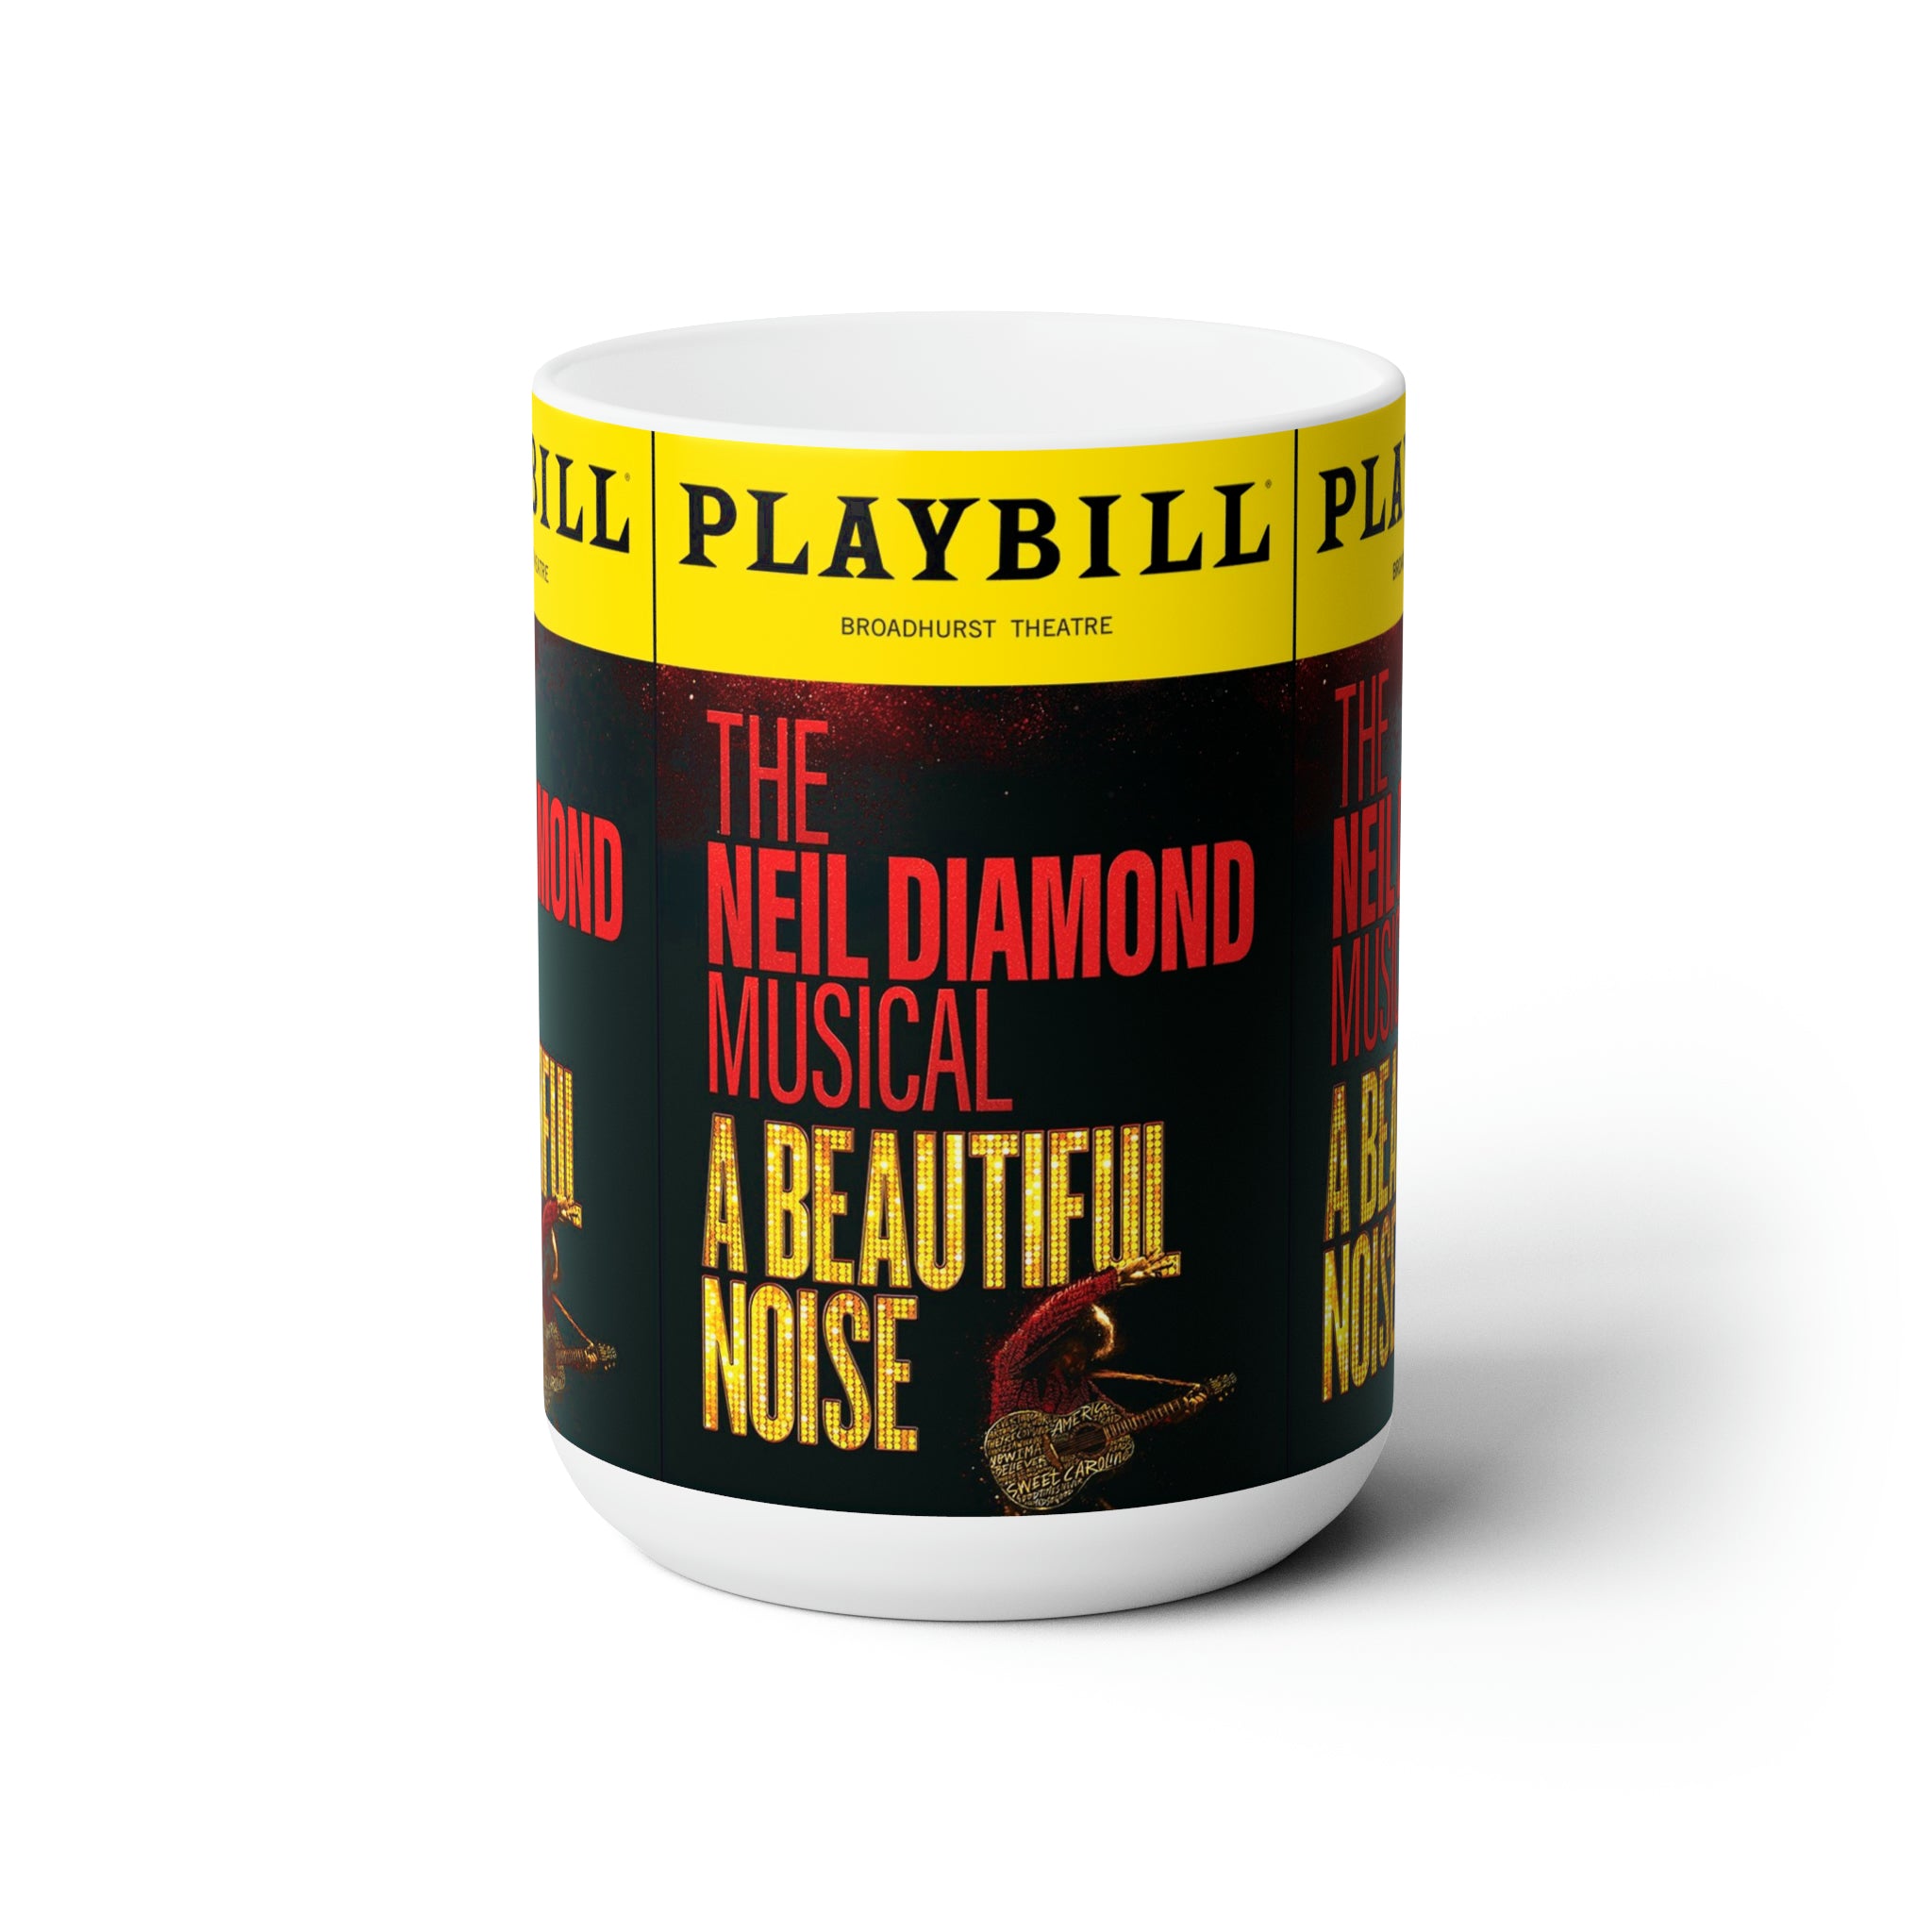 https://creationsbychrisandcarlos.store/products/a-beautiful-noise-broadway-play-white-ceramic-mug